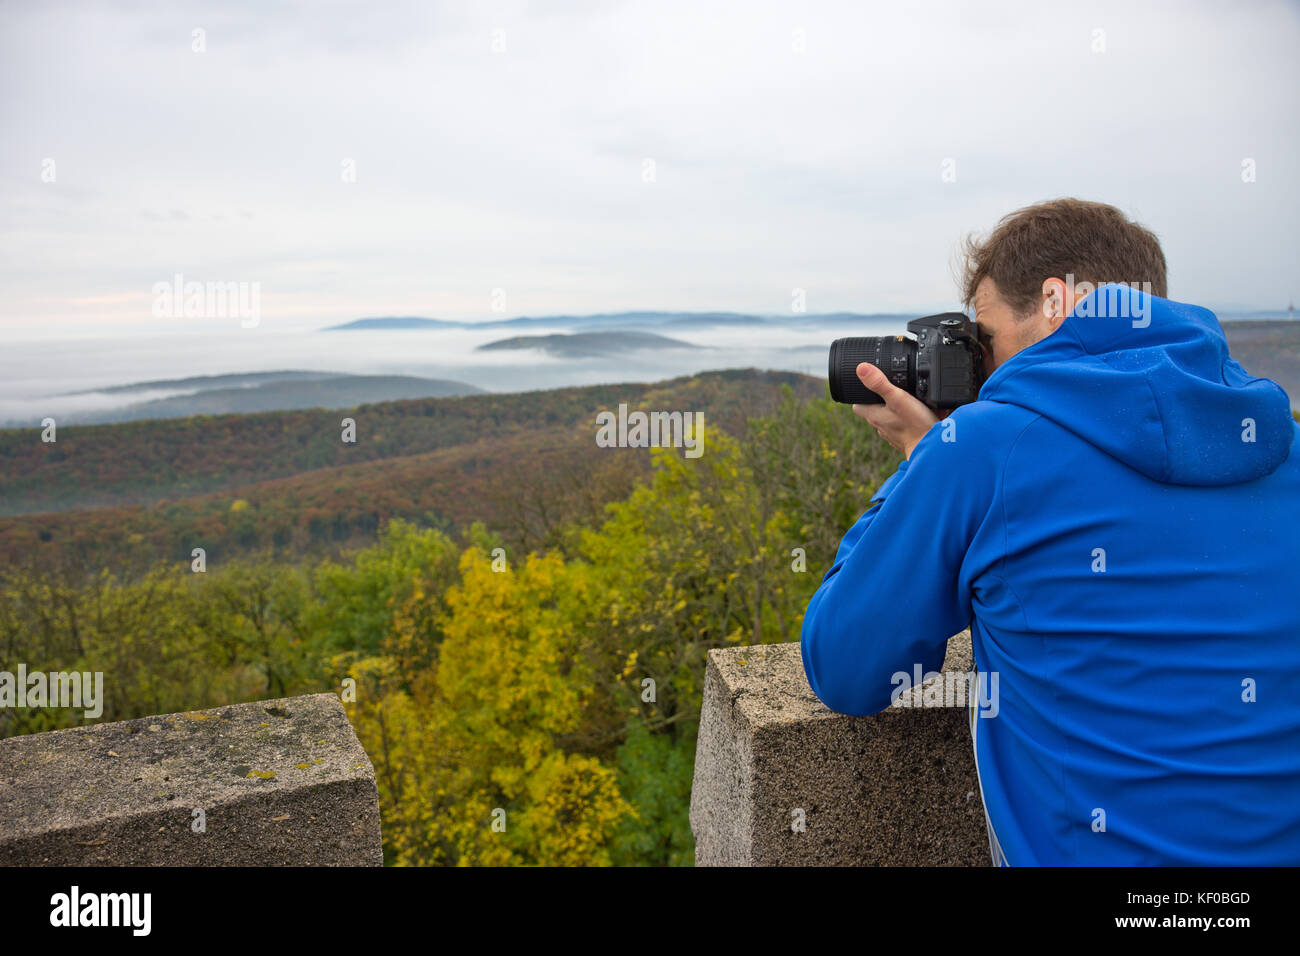 Photographer taking a photo on a mountain in Wienerwald on a misty and gloomy autumn day. Stock Photo